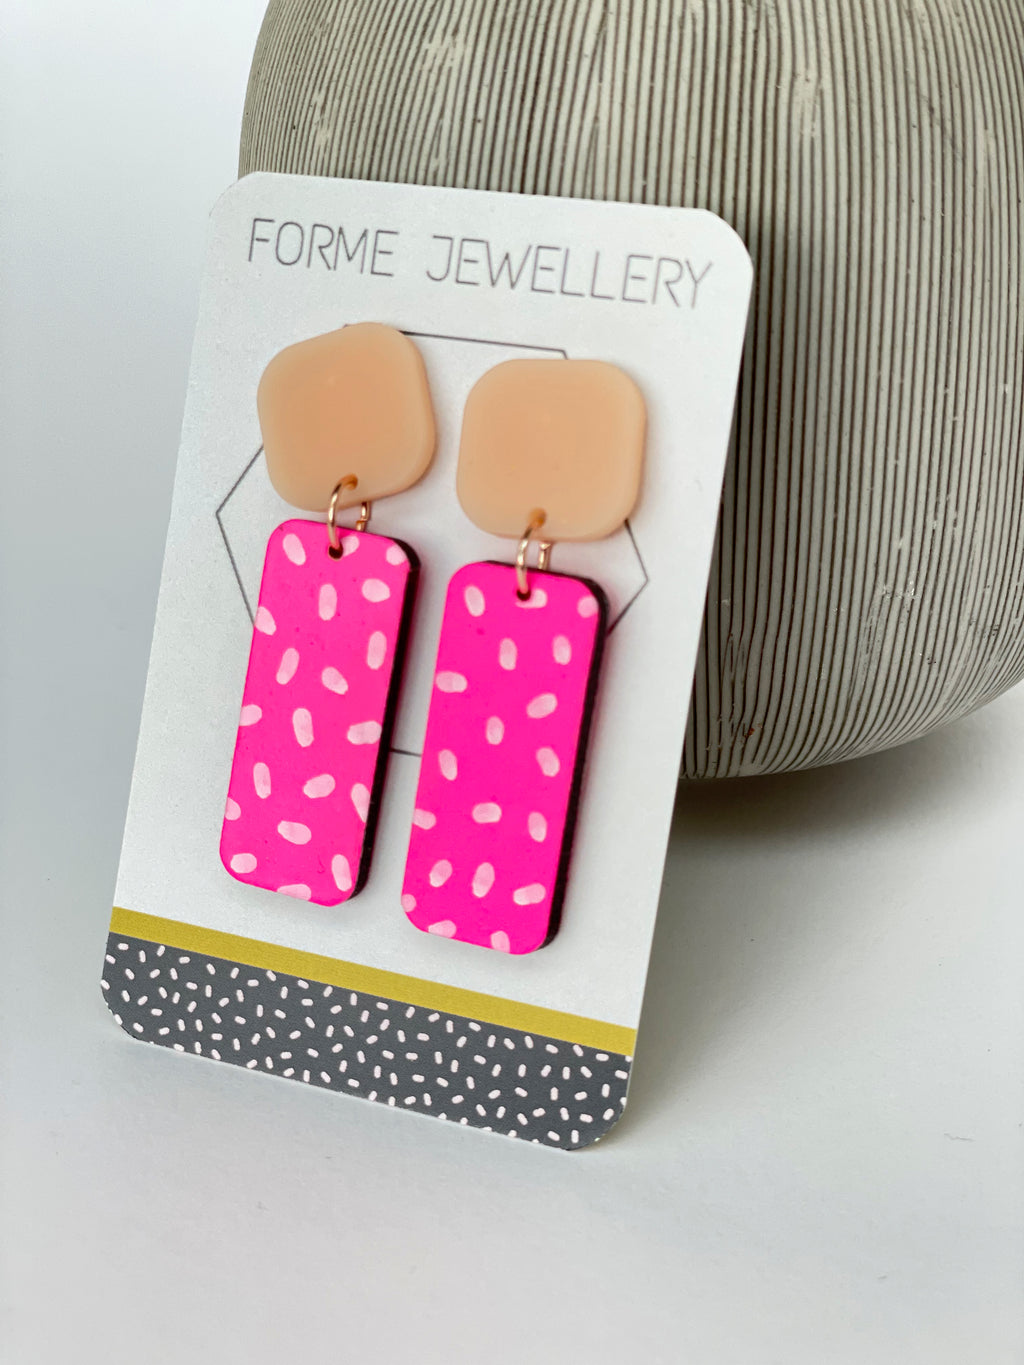 NEON PINK DANGLY RECTANGULAR EARRINGS WITH A WHITE DASH PATTERN